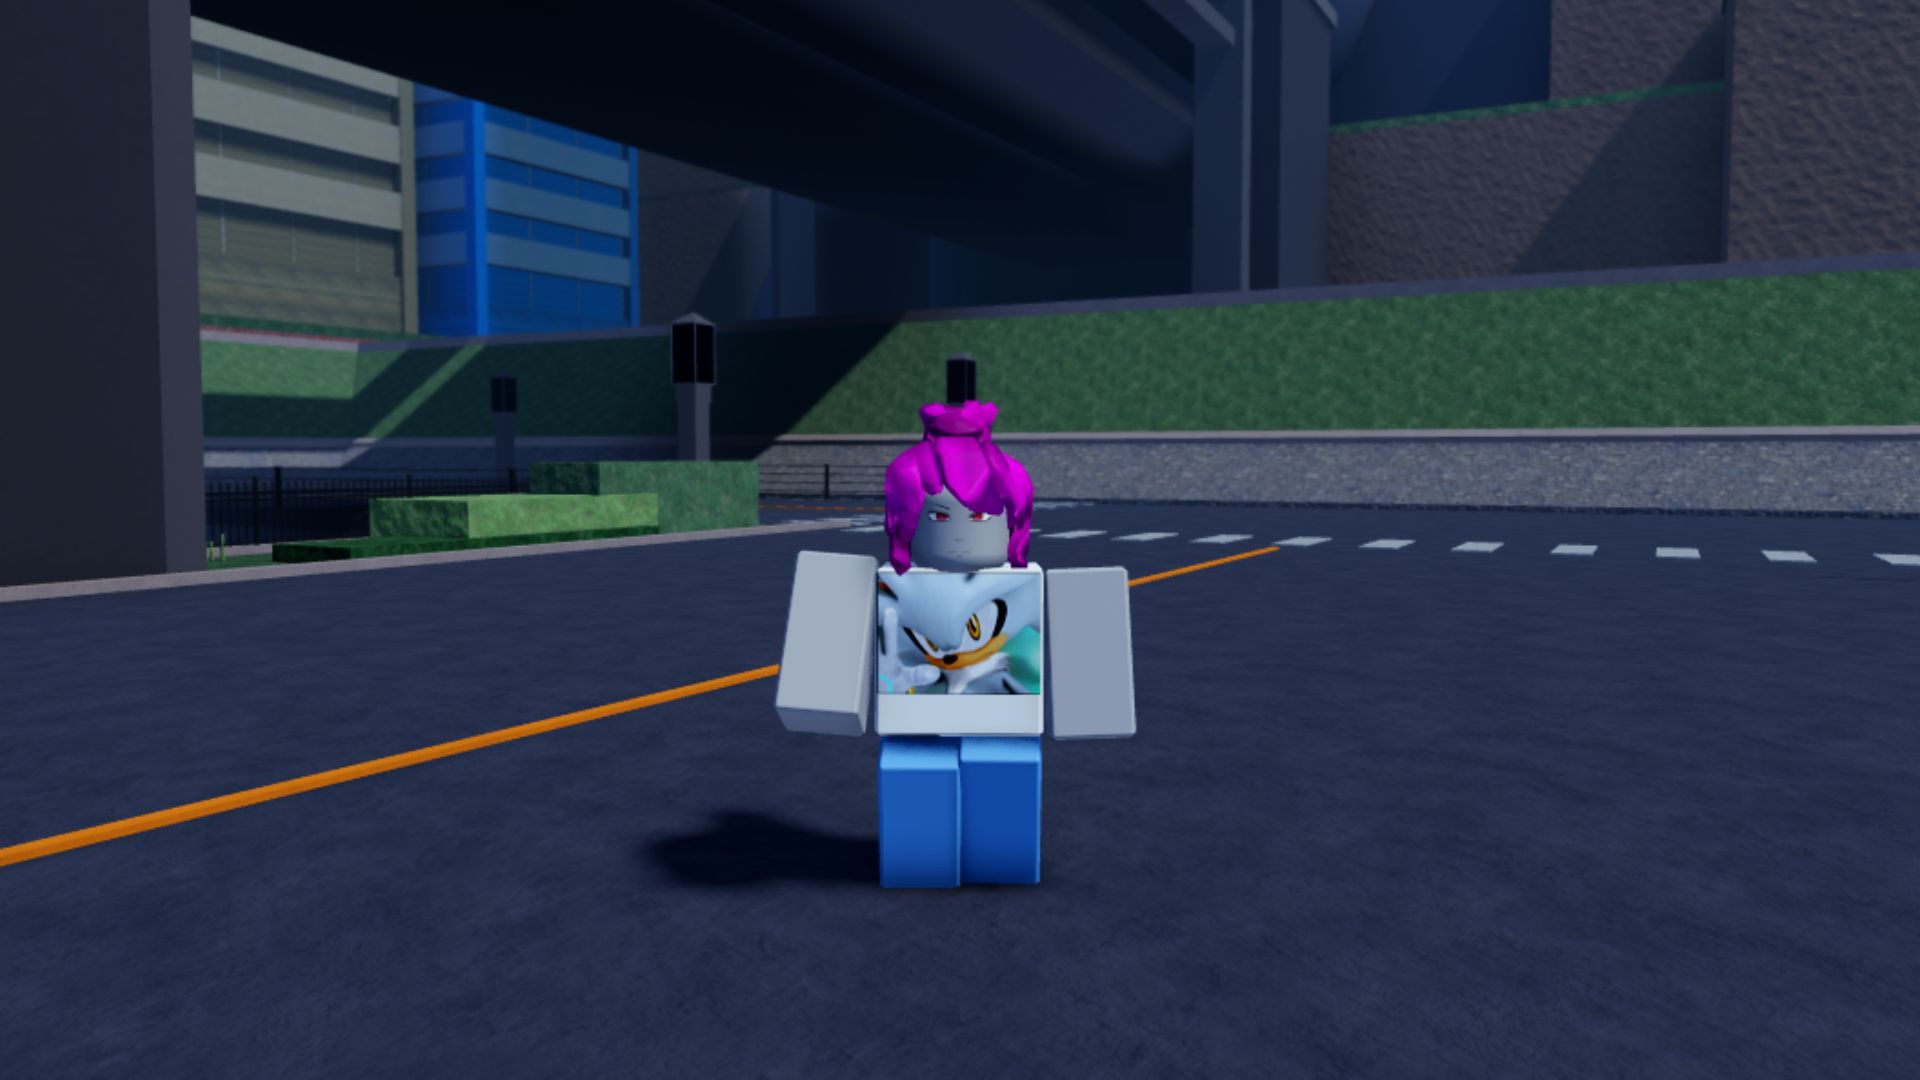 Roblox Fighters Era 2 codes for December 2023: Free Rerolls & Resets -  Charlie INTEL